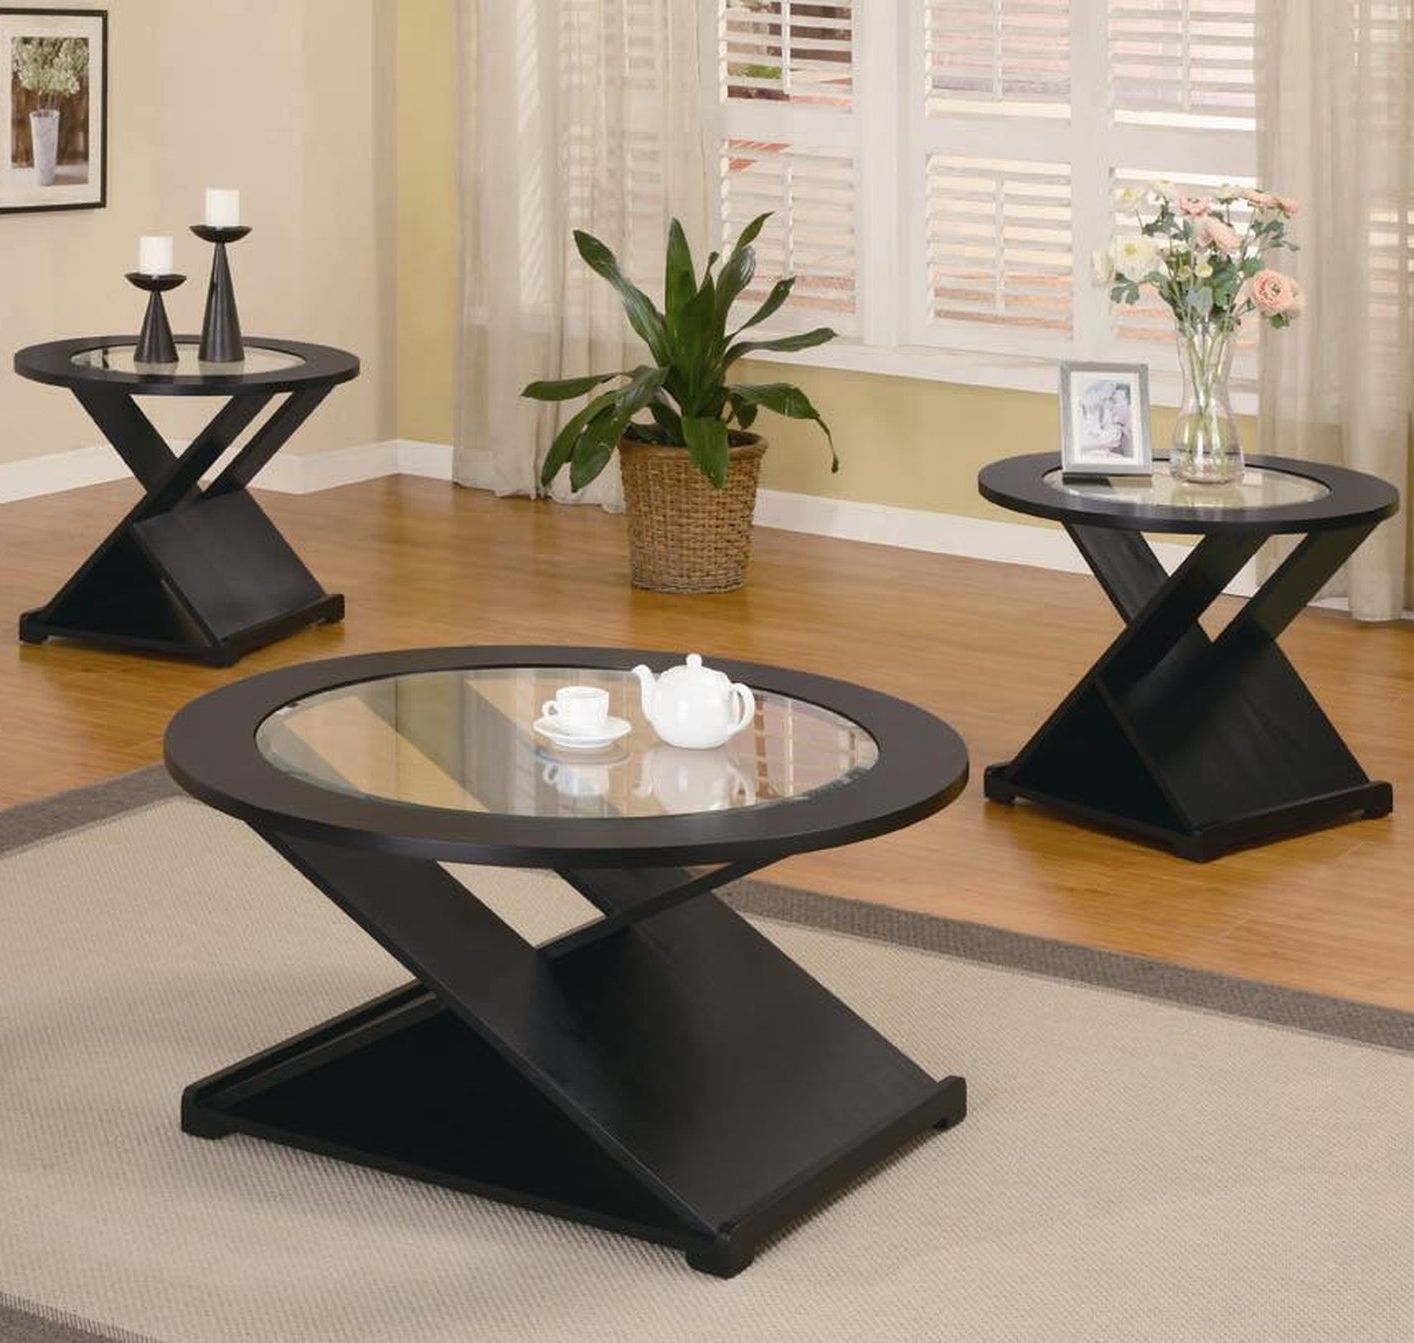 Newest Black Round Glass Top Cocktail Tables With Black Wood Coffee Table Set – Steal A Sofa Furniture (Gallery 11 of 20)